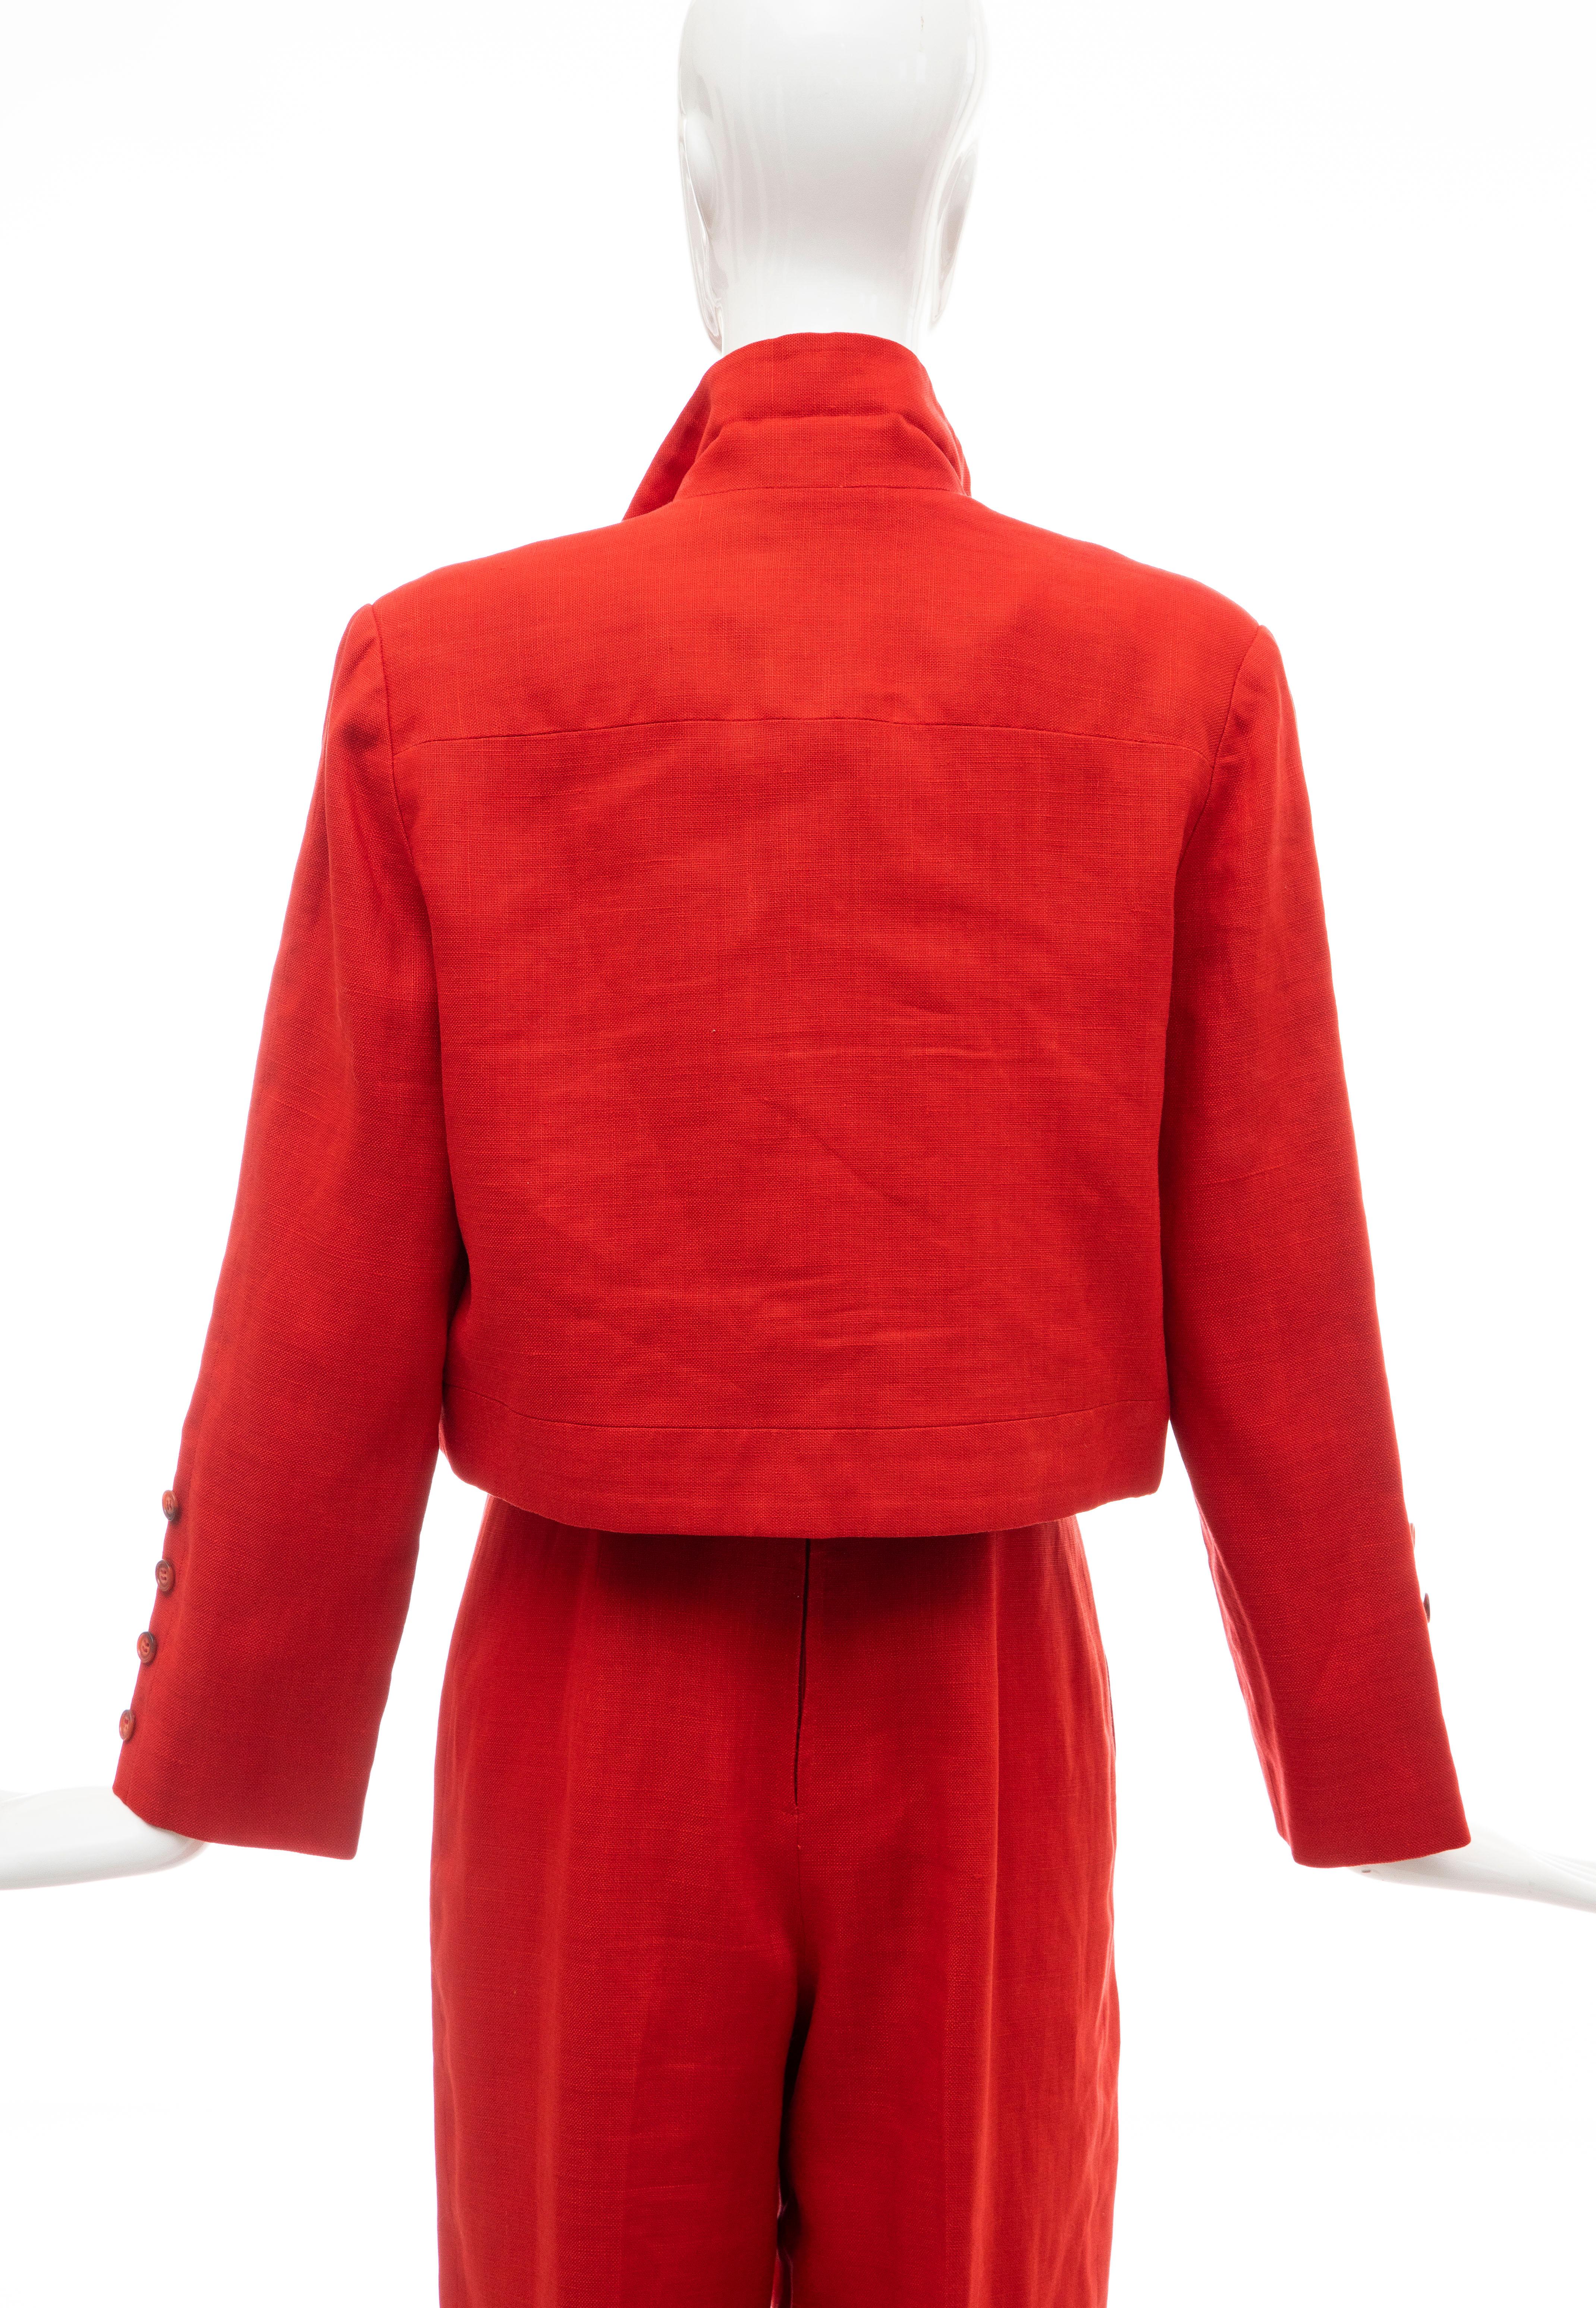 Geoffrey Beene Red Linen Jumpsuit Silk Lined With Jacket, Circa: 1970's For Sale 12